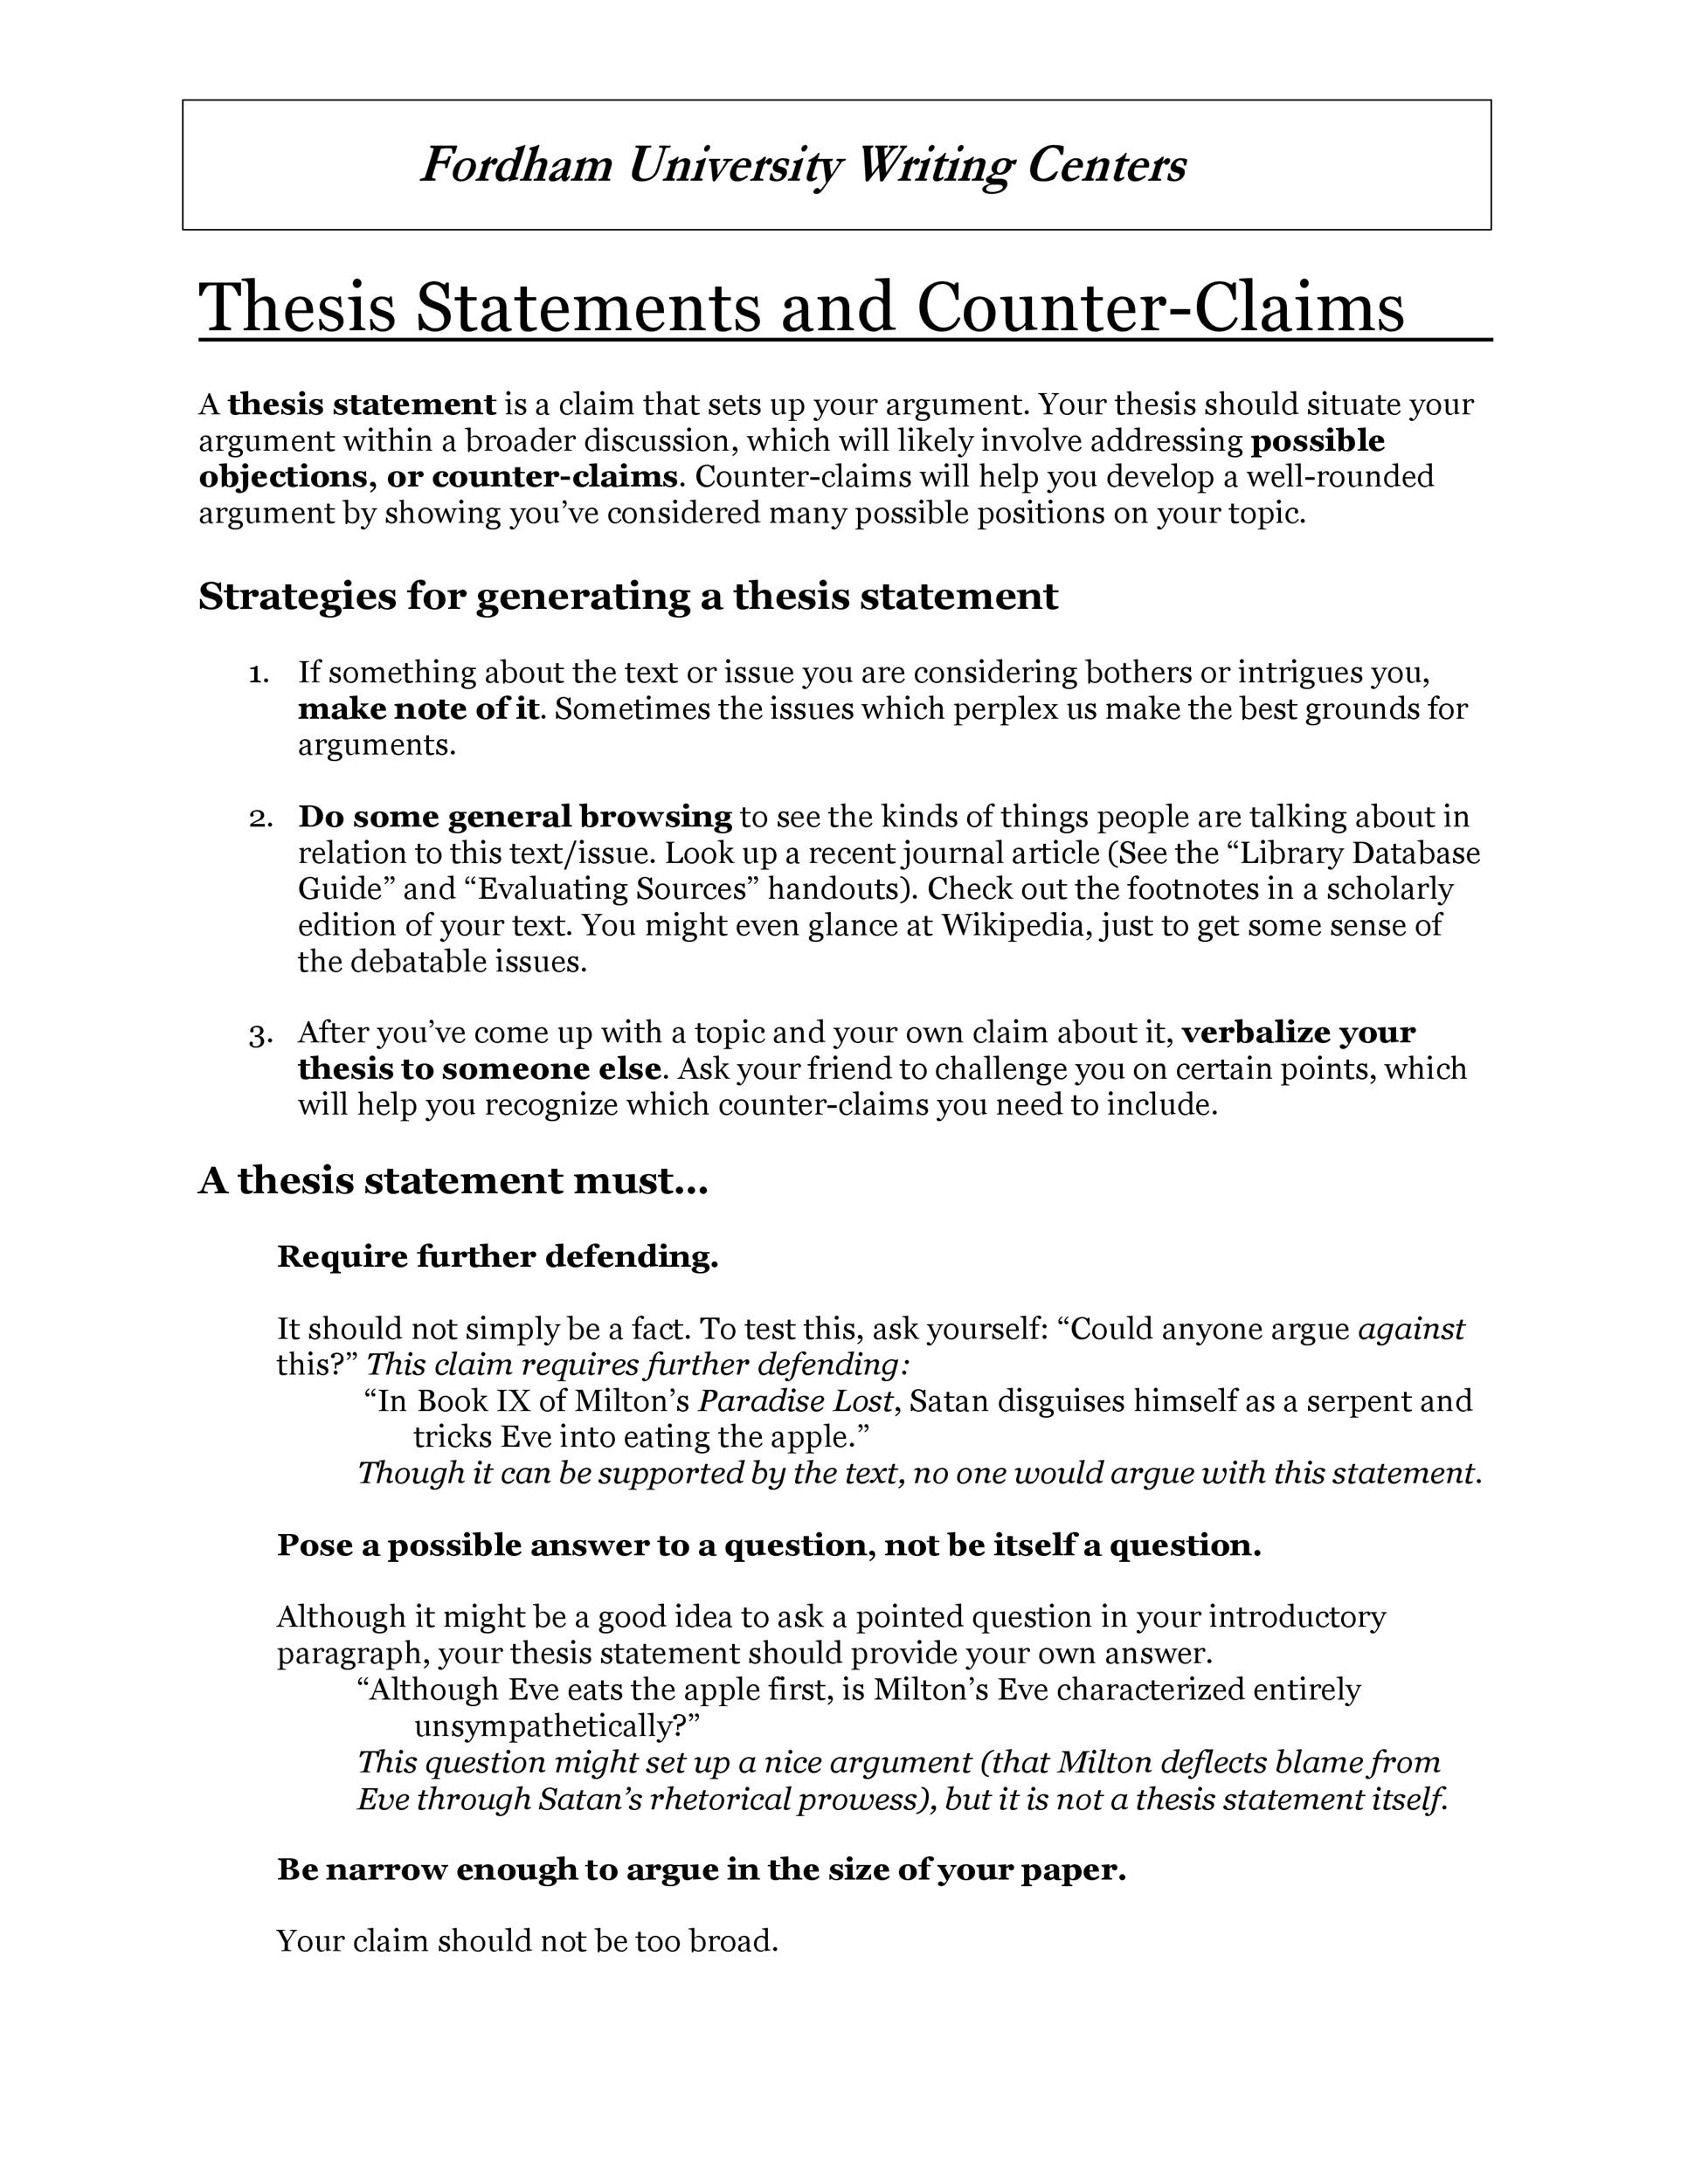 what is the purpose of thesis statement in argumentative essay